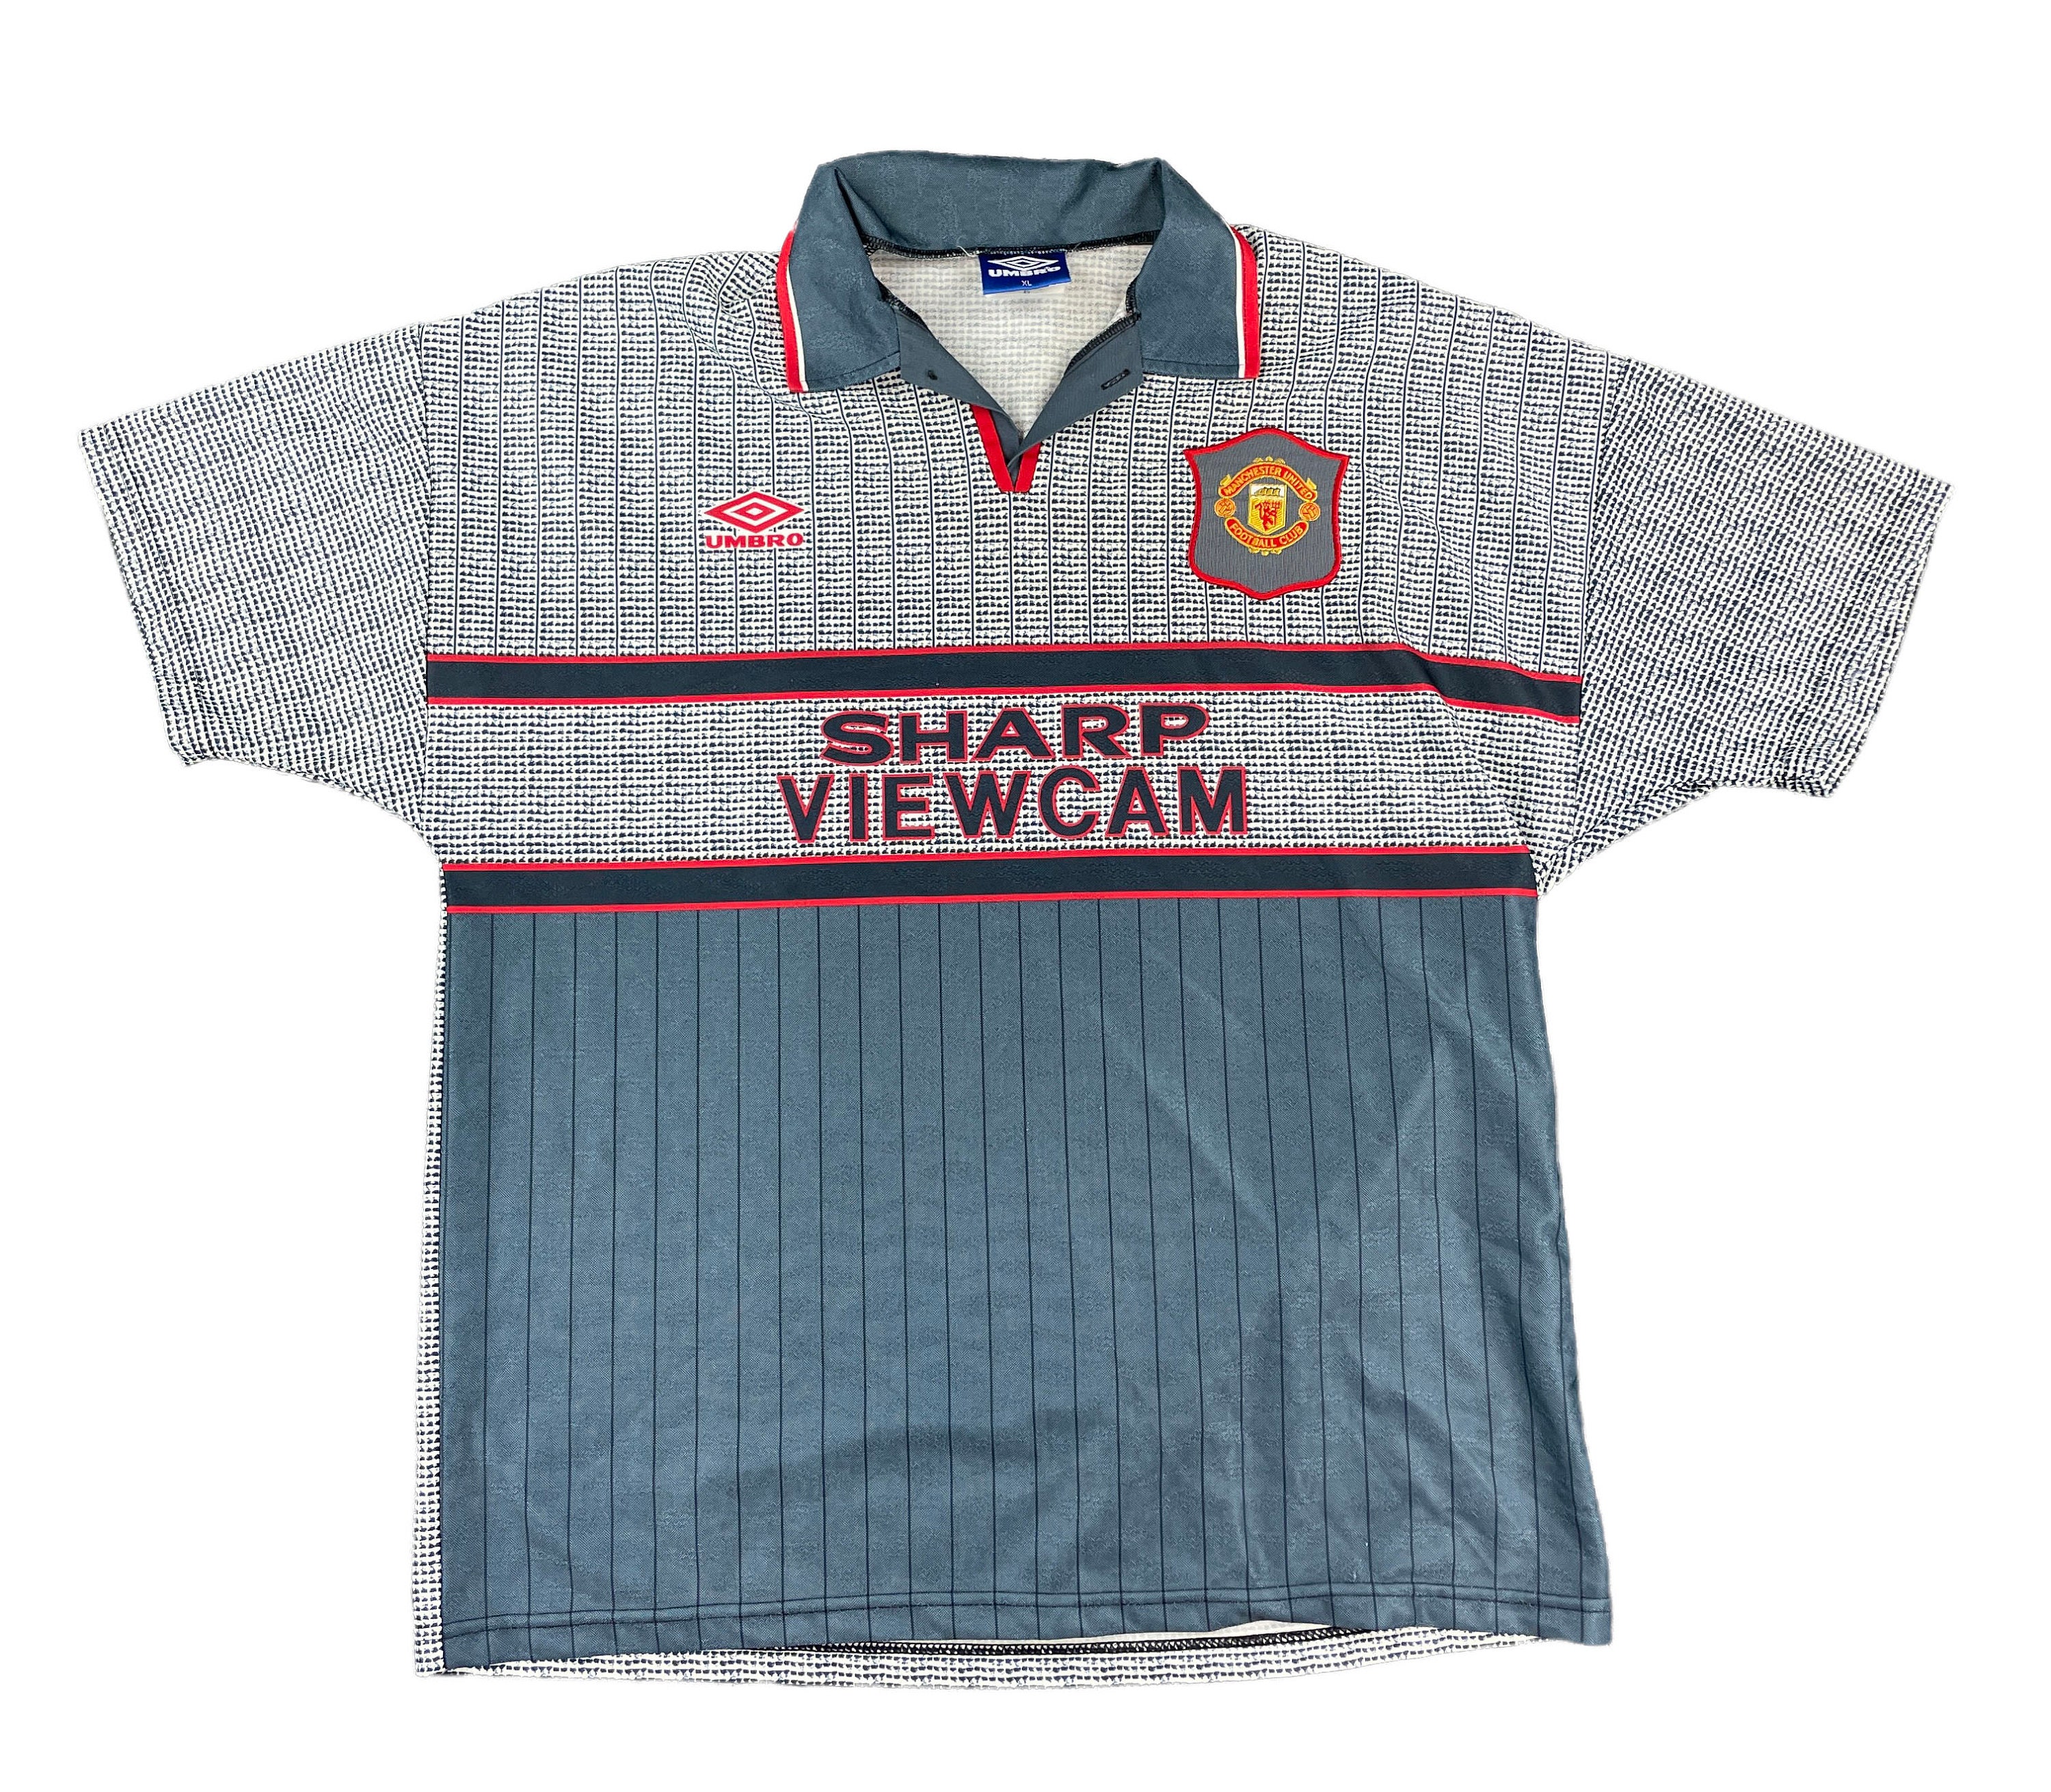 classic manchester united jersey